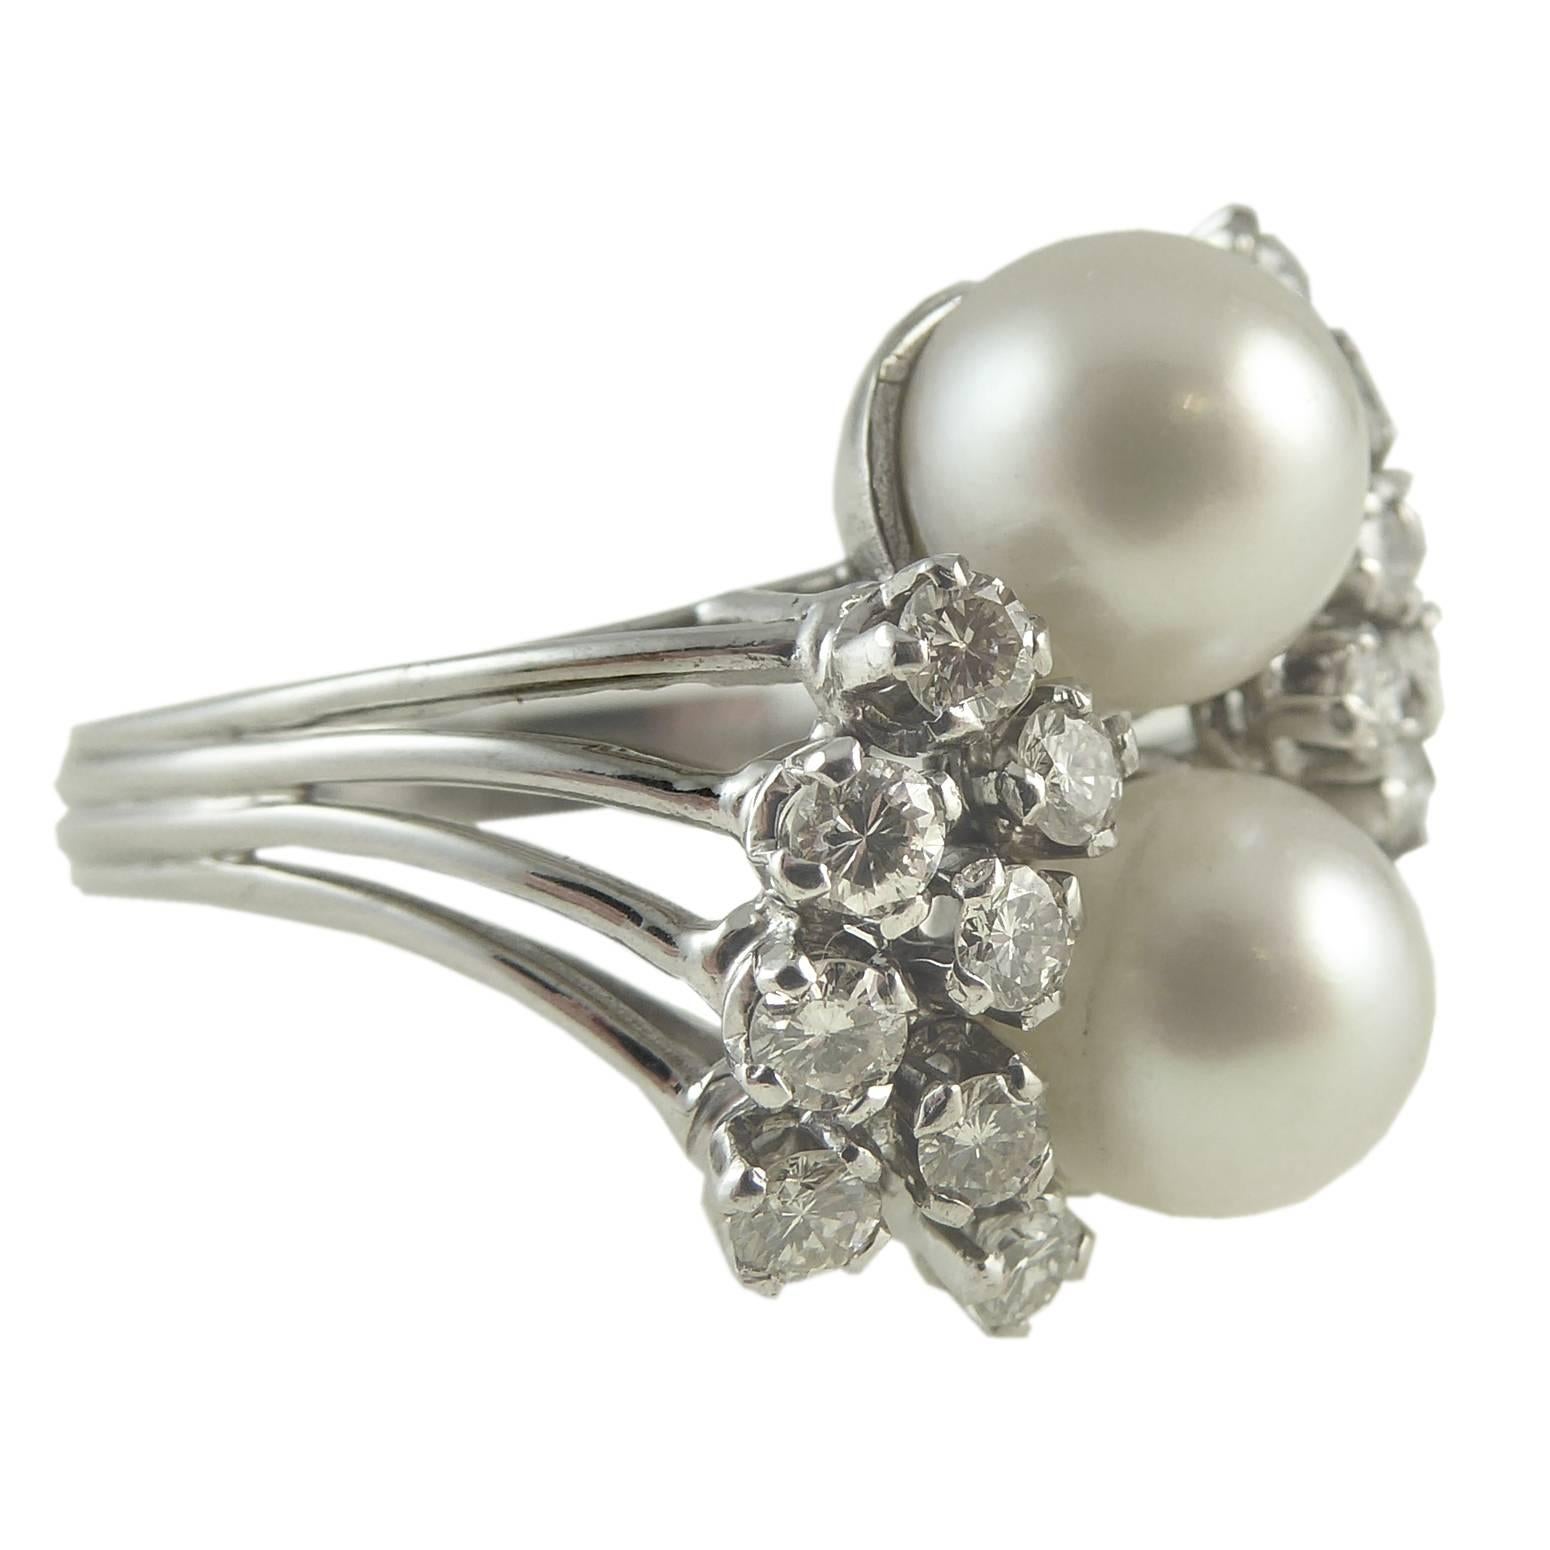 Retro Vintage Diamond and Pearl Cocktail Cluster Ring in 18 Carat White Gold